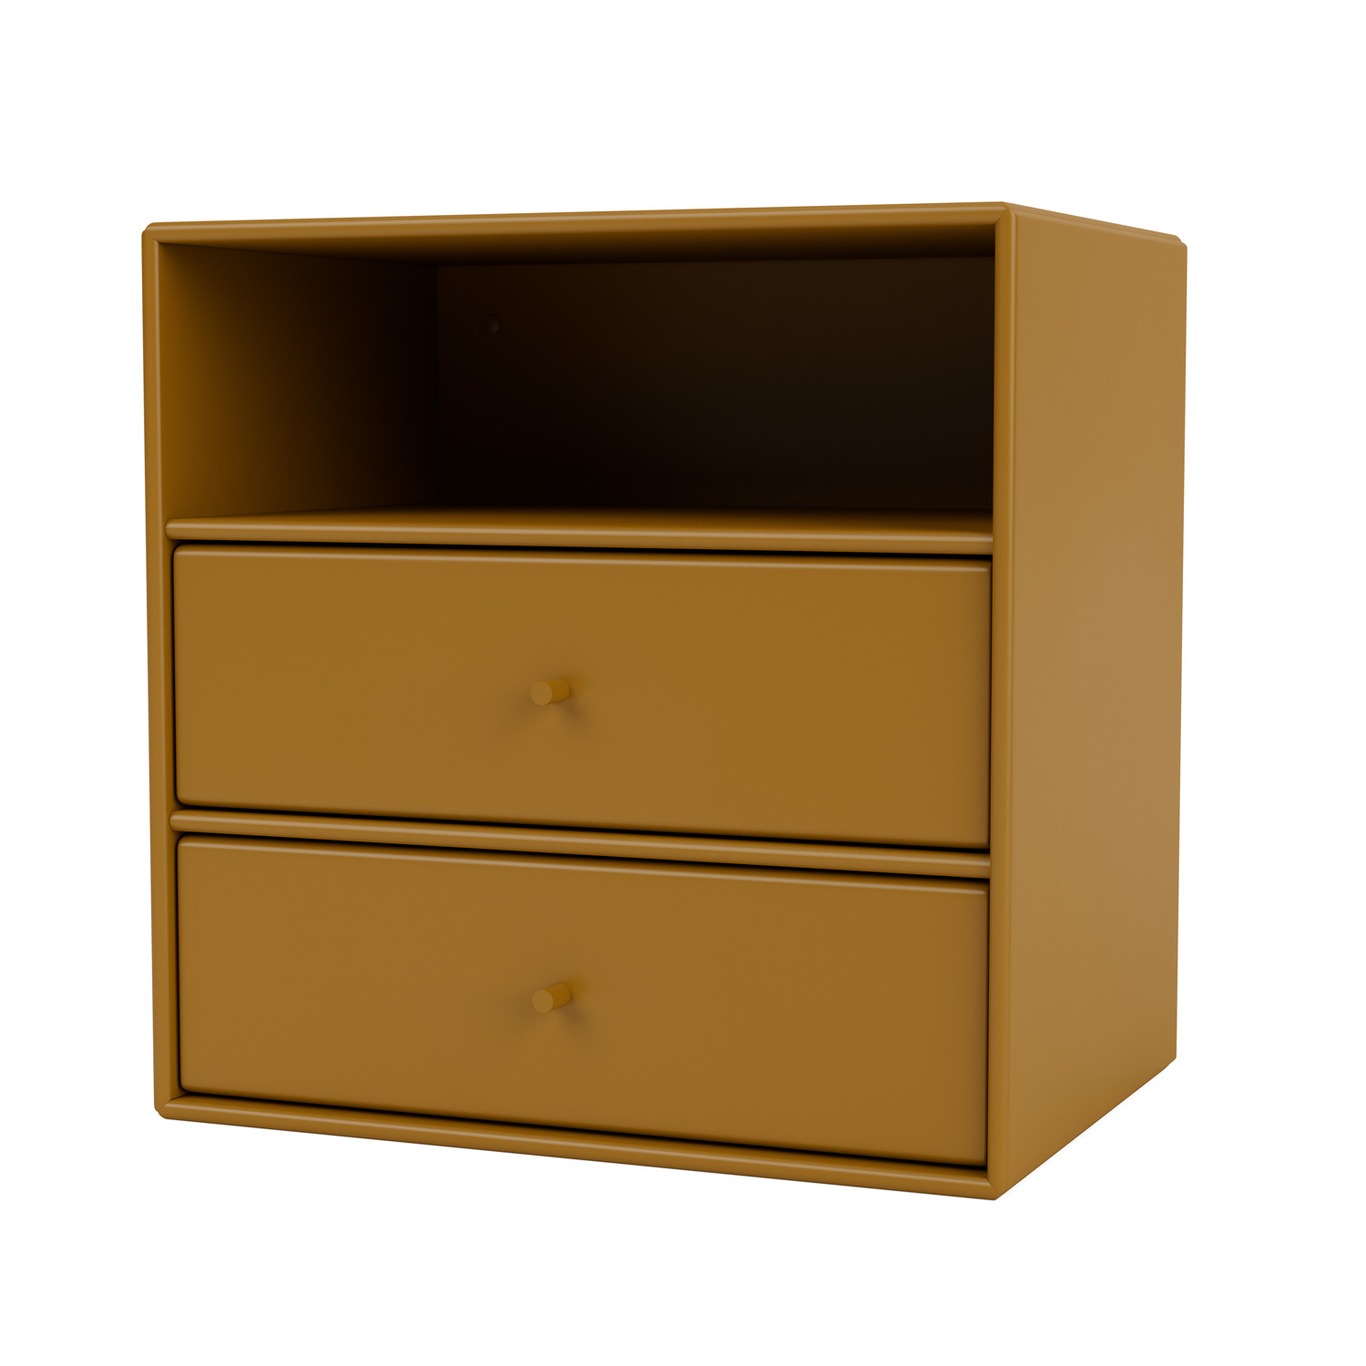 Mini 1006 Shelf With Two Drawers, Amber